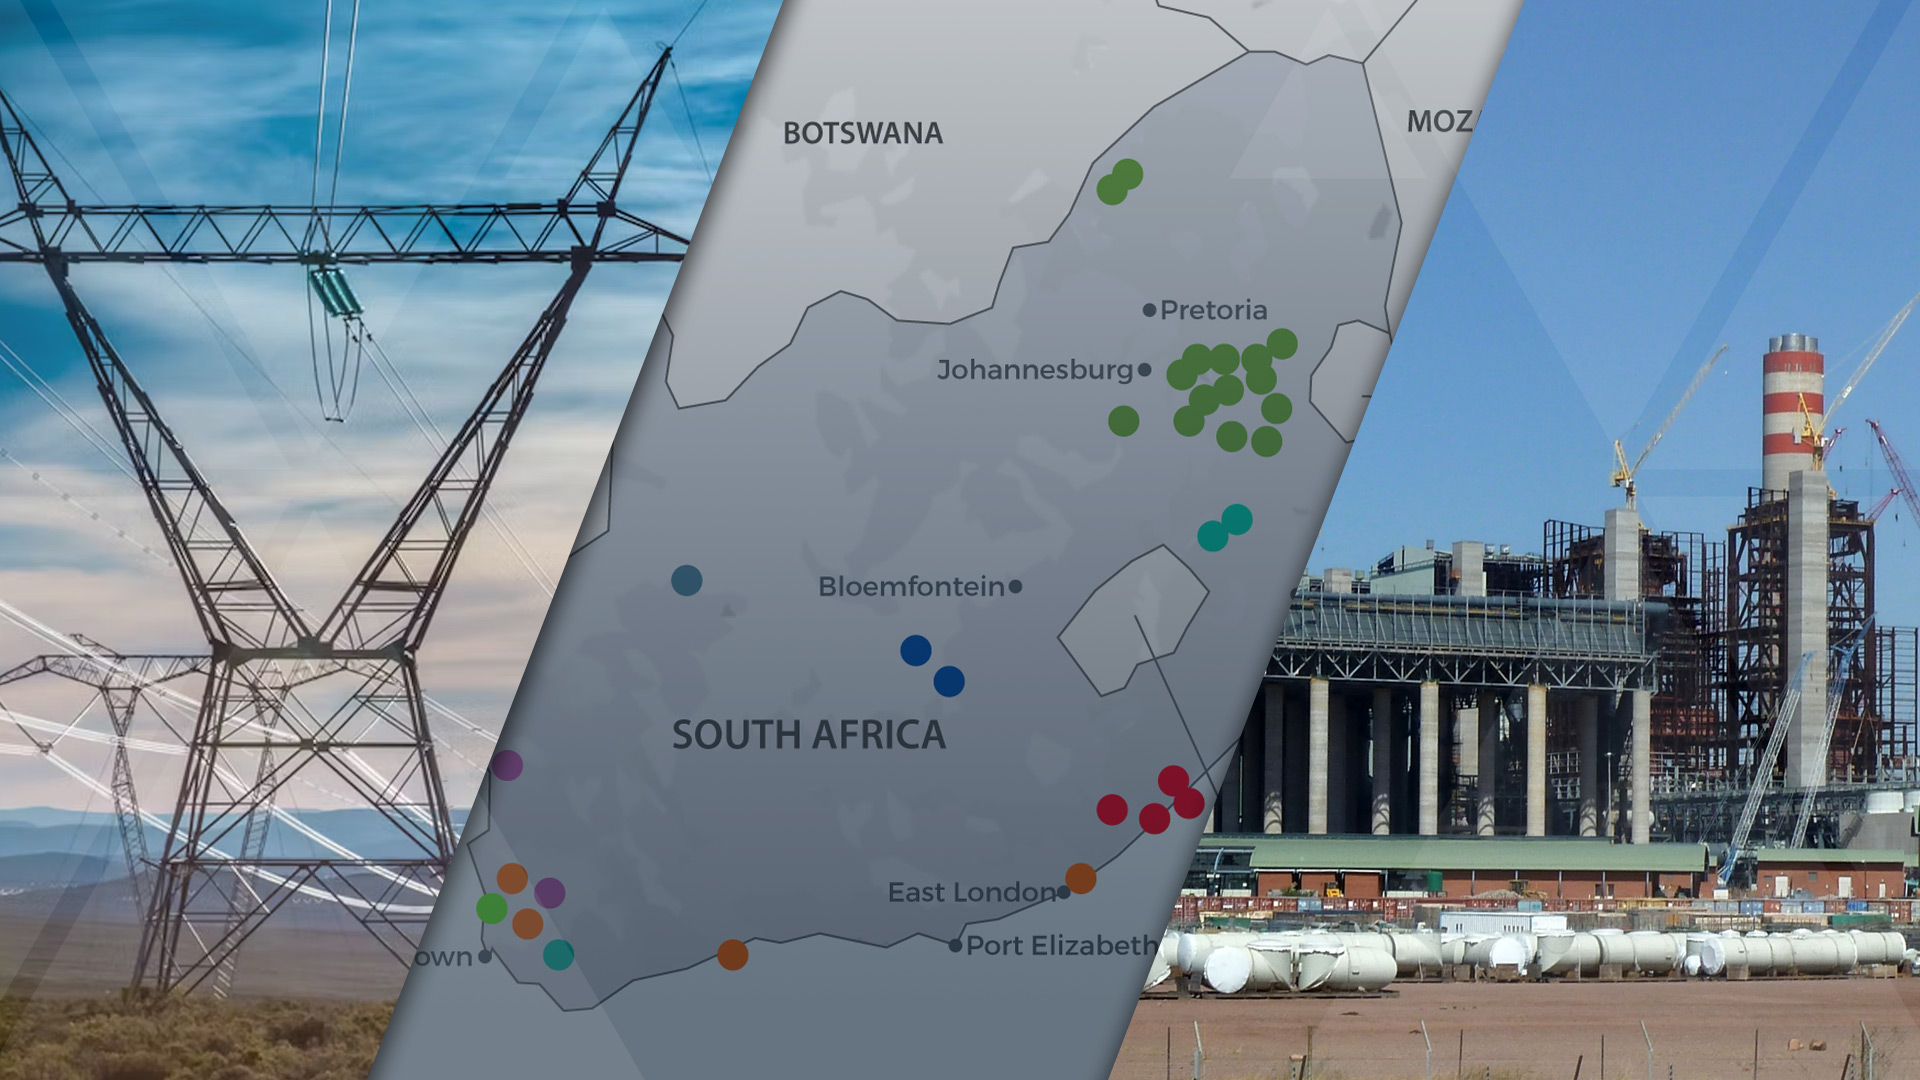 SOUTH AFRICA: NEW RENEWABLE ENERGY BIDS FAIL TO OFFSET NEAR-TERM RISKS IN ELECTRICITY CRISIS